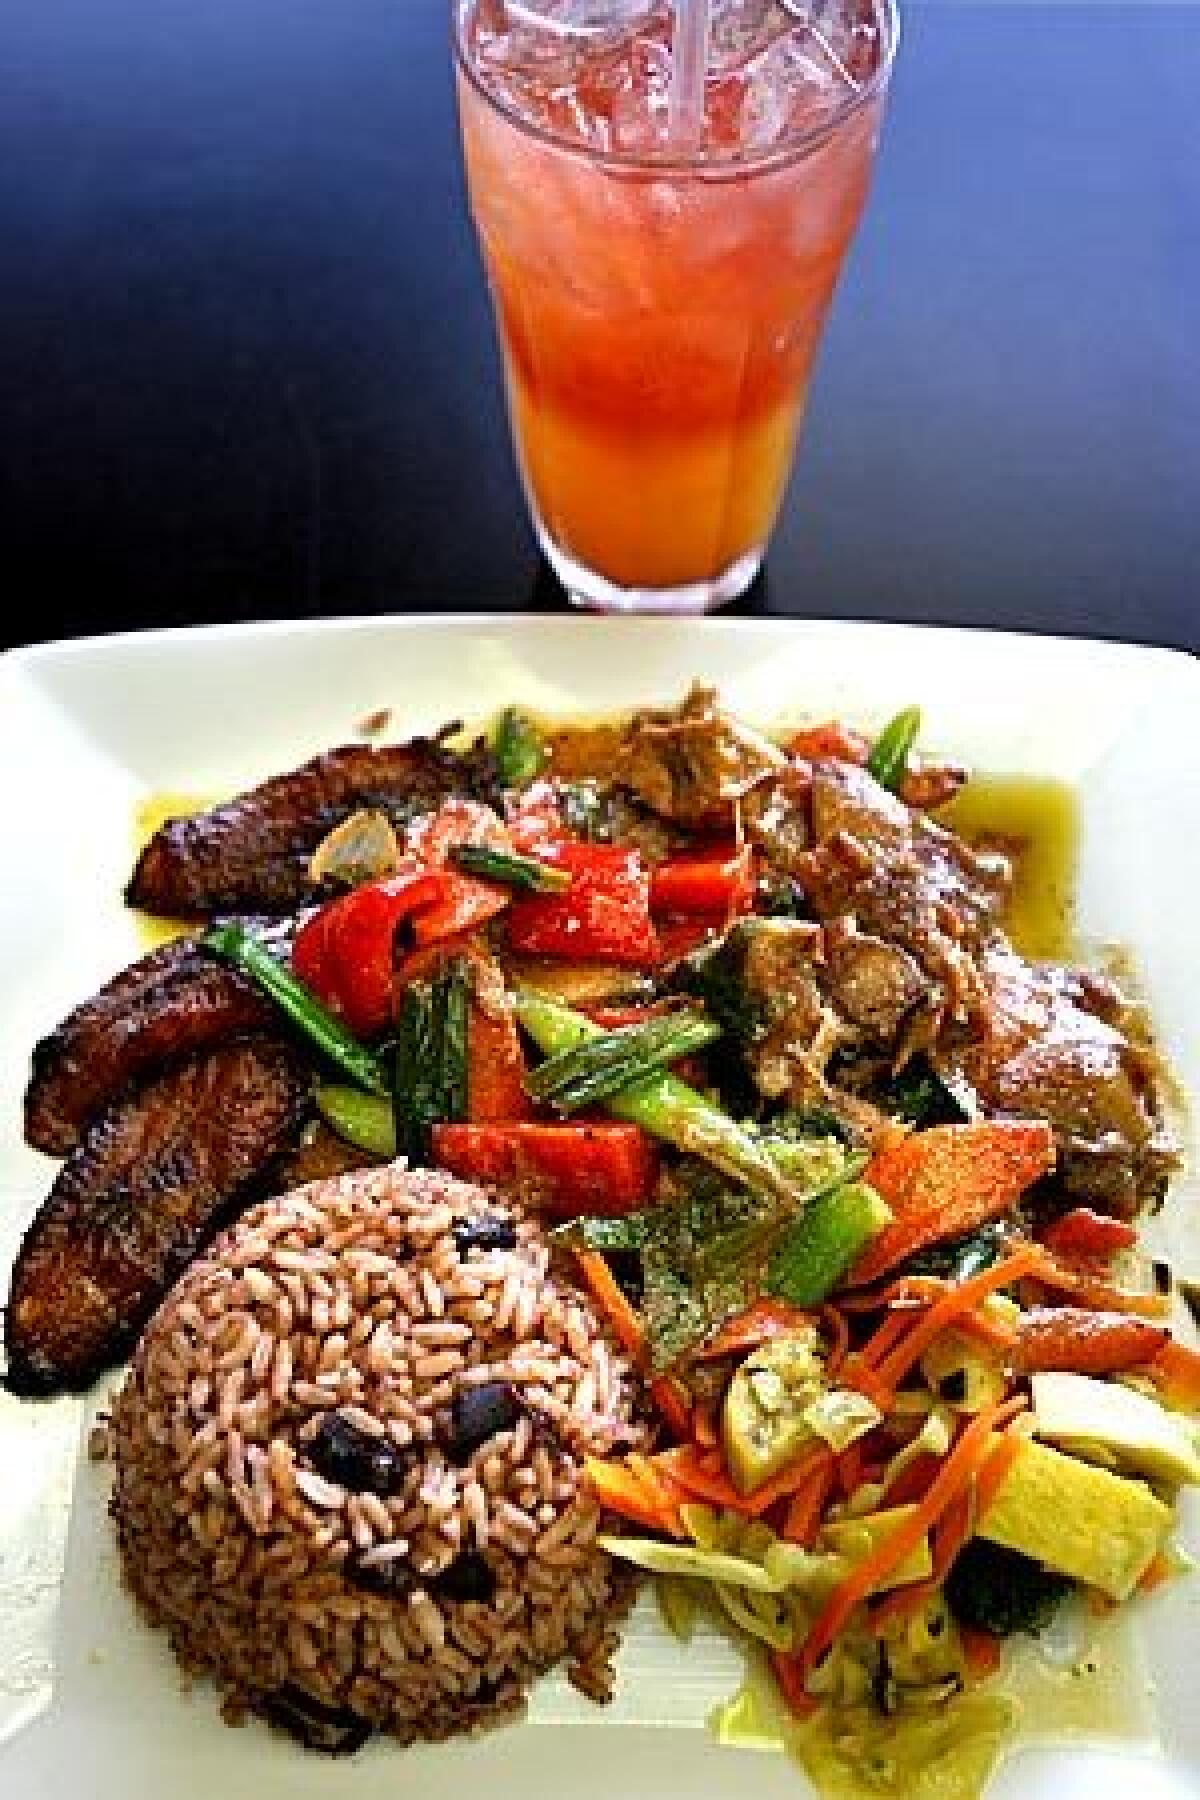 Tropical chicken -- with guava, ginger and pineapple in a sauce served with rice and peas and fried plantains -- is on the menu at Sattdown Jamaican Grill in Studio City.